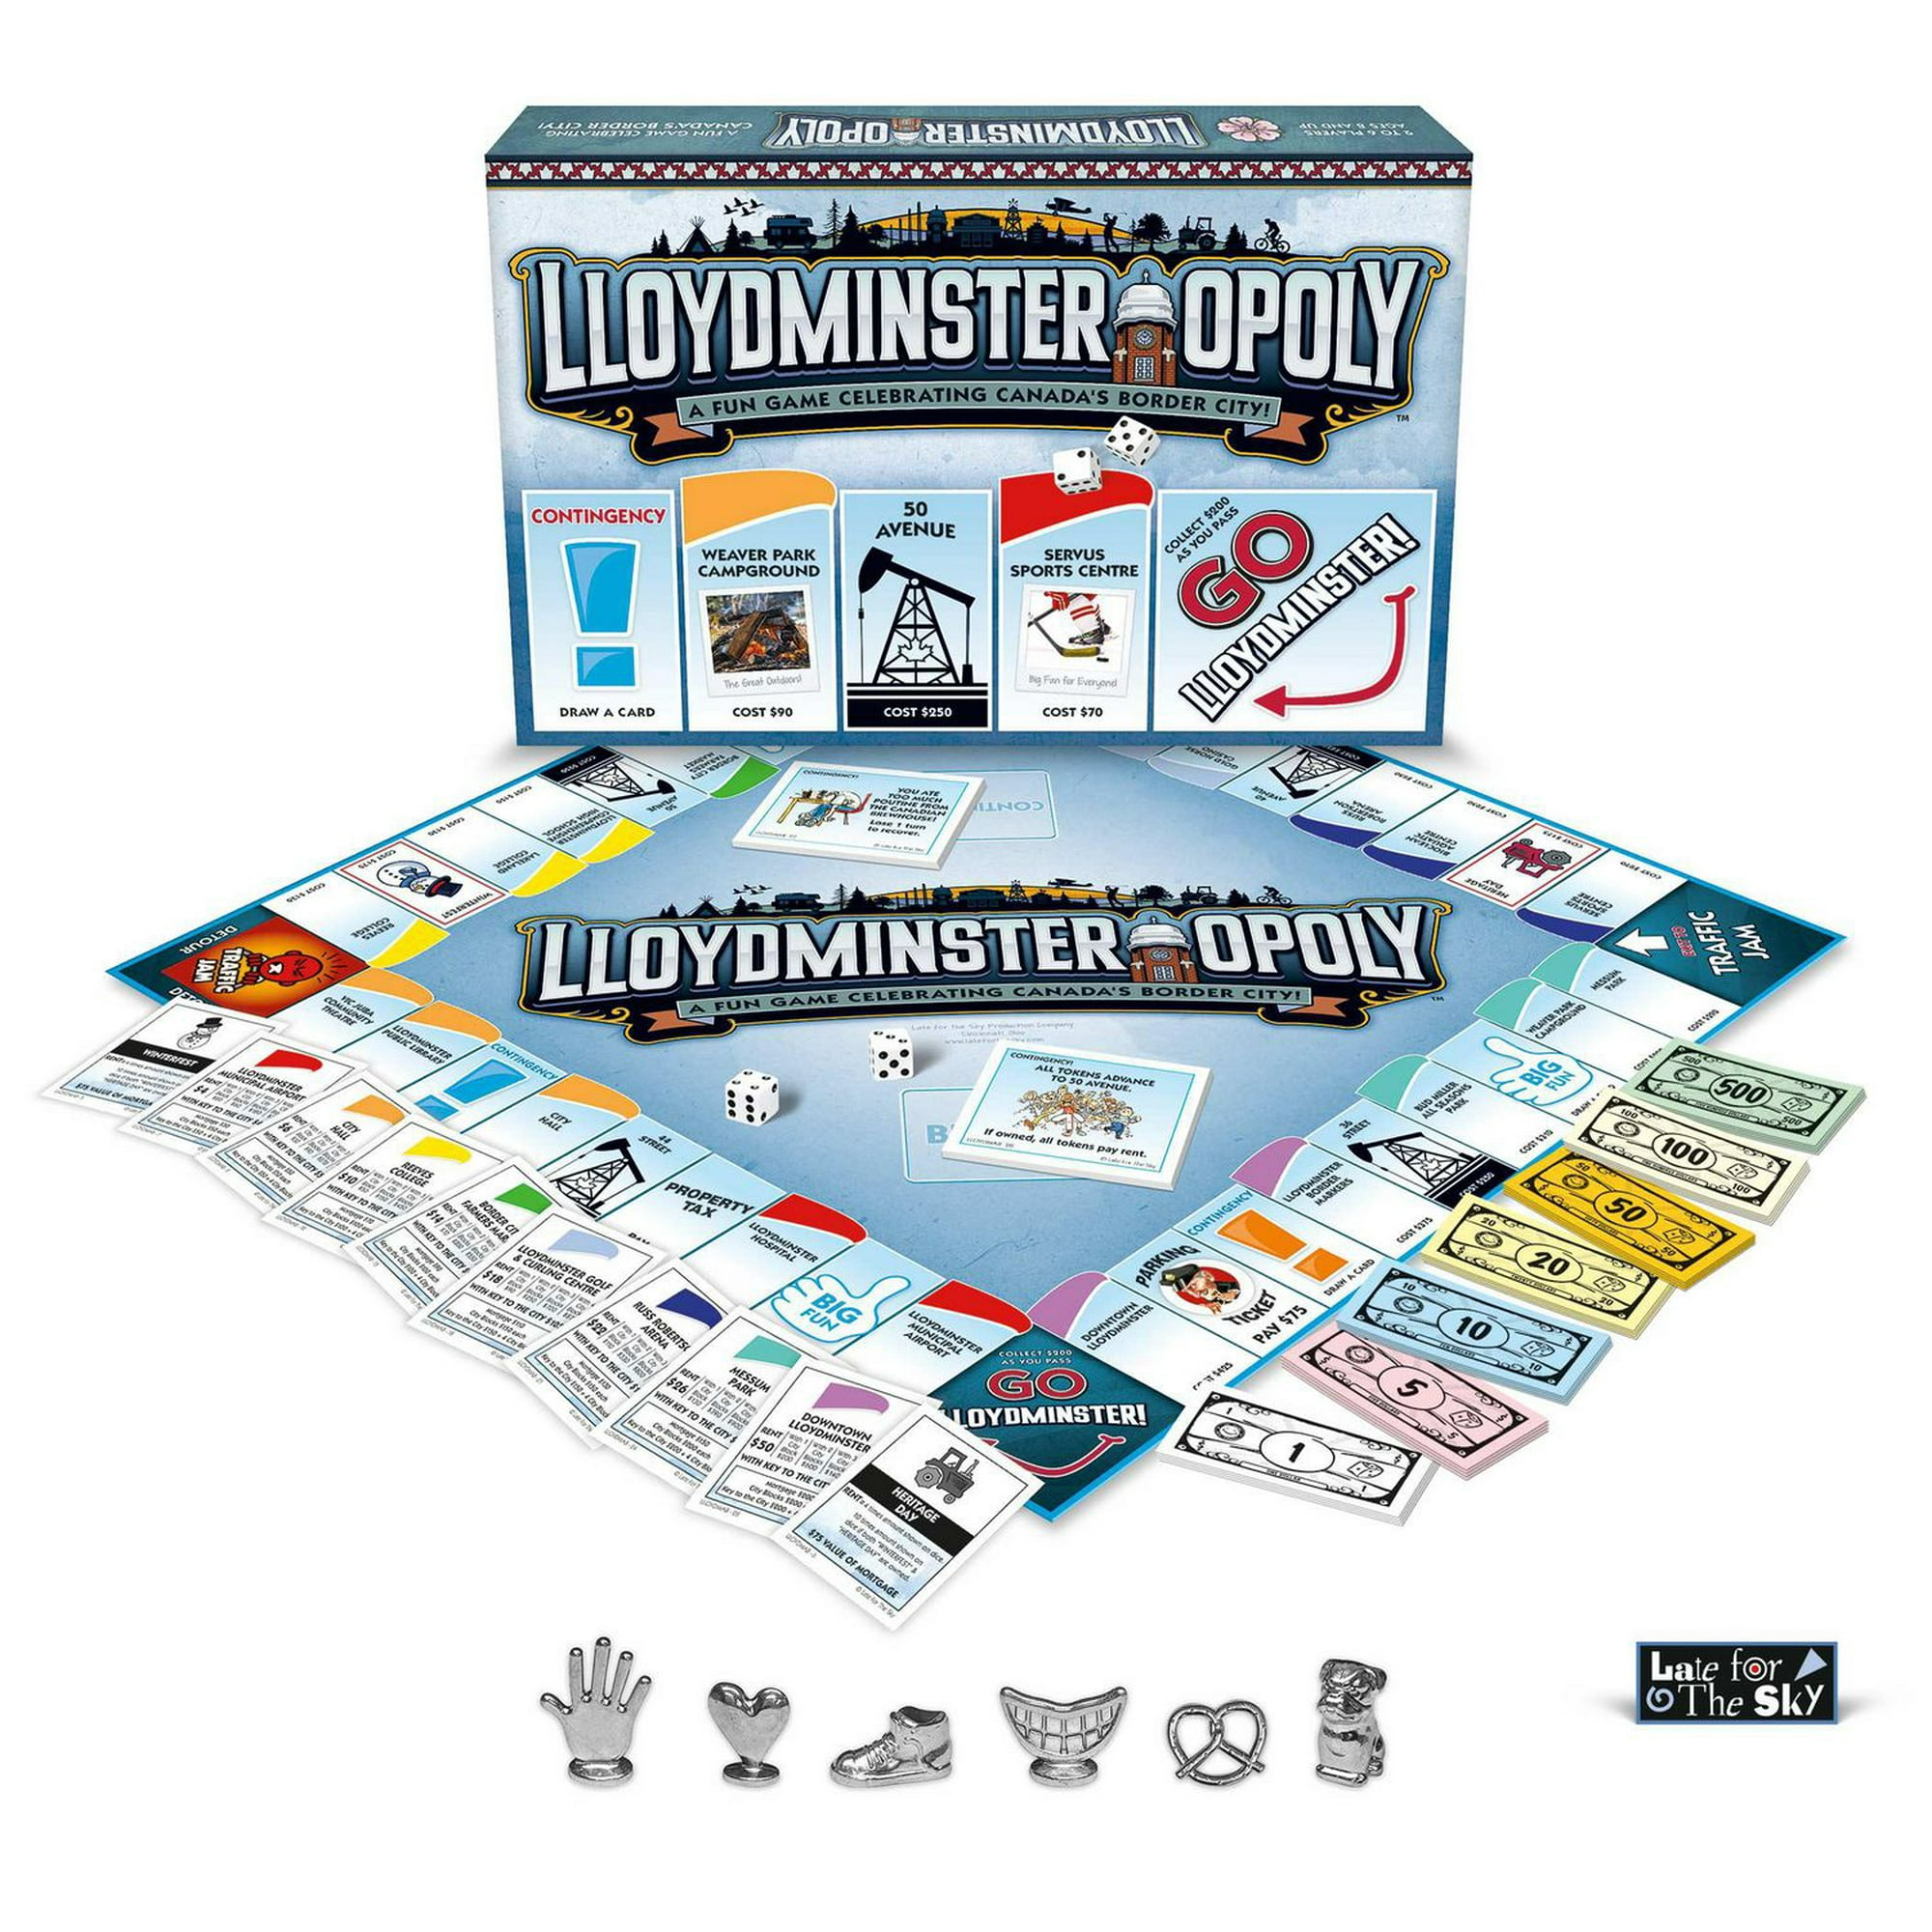 LATE FOR THE SKY - Lloydminster-Opoly